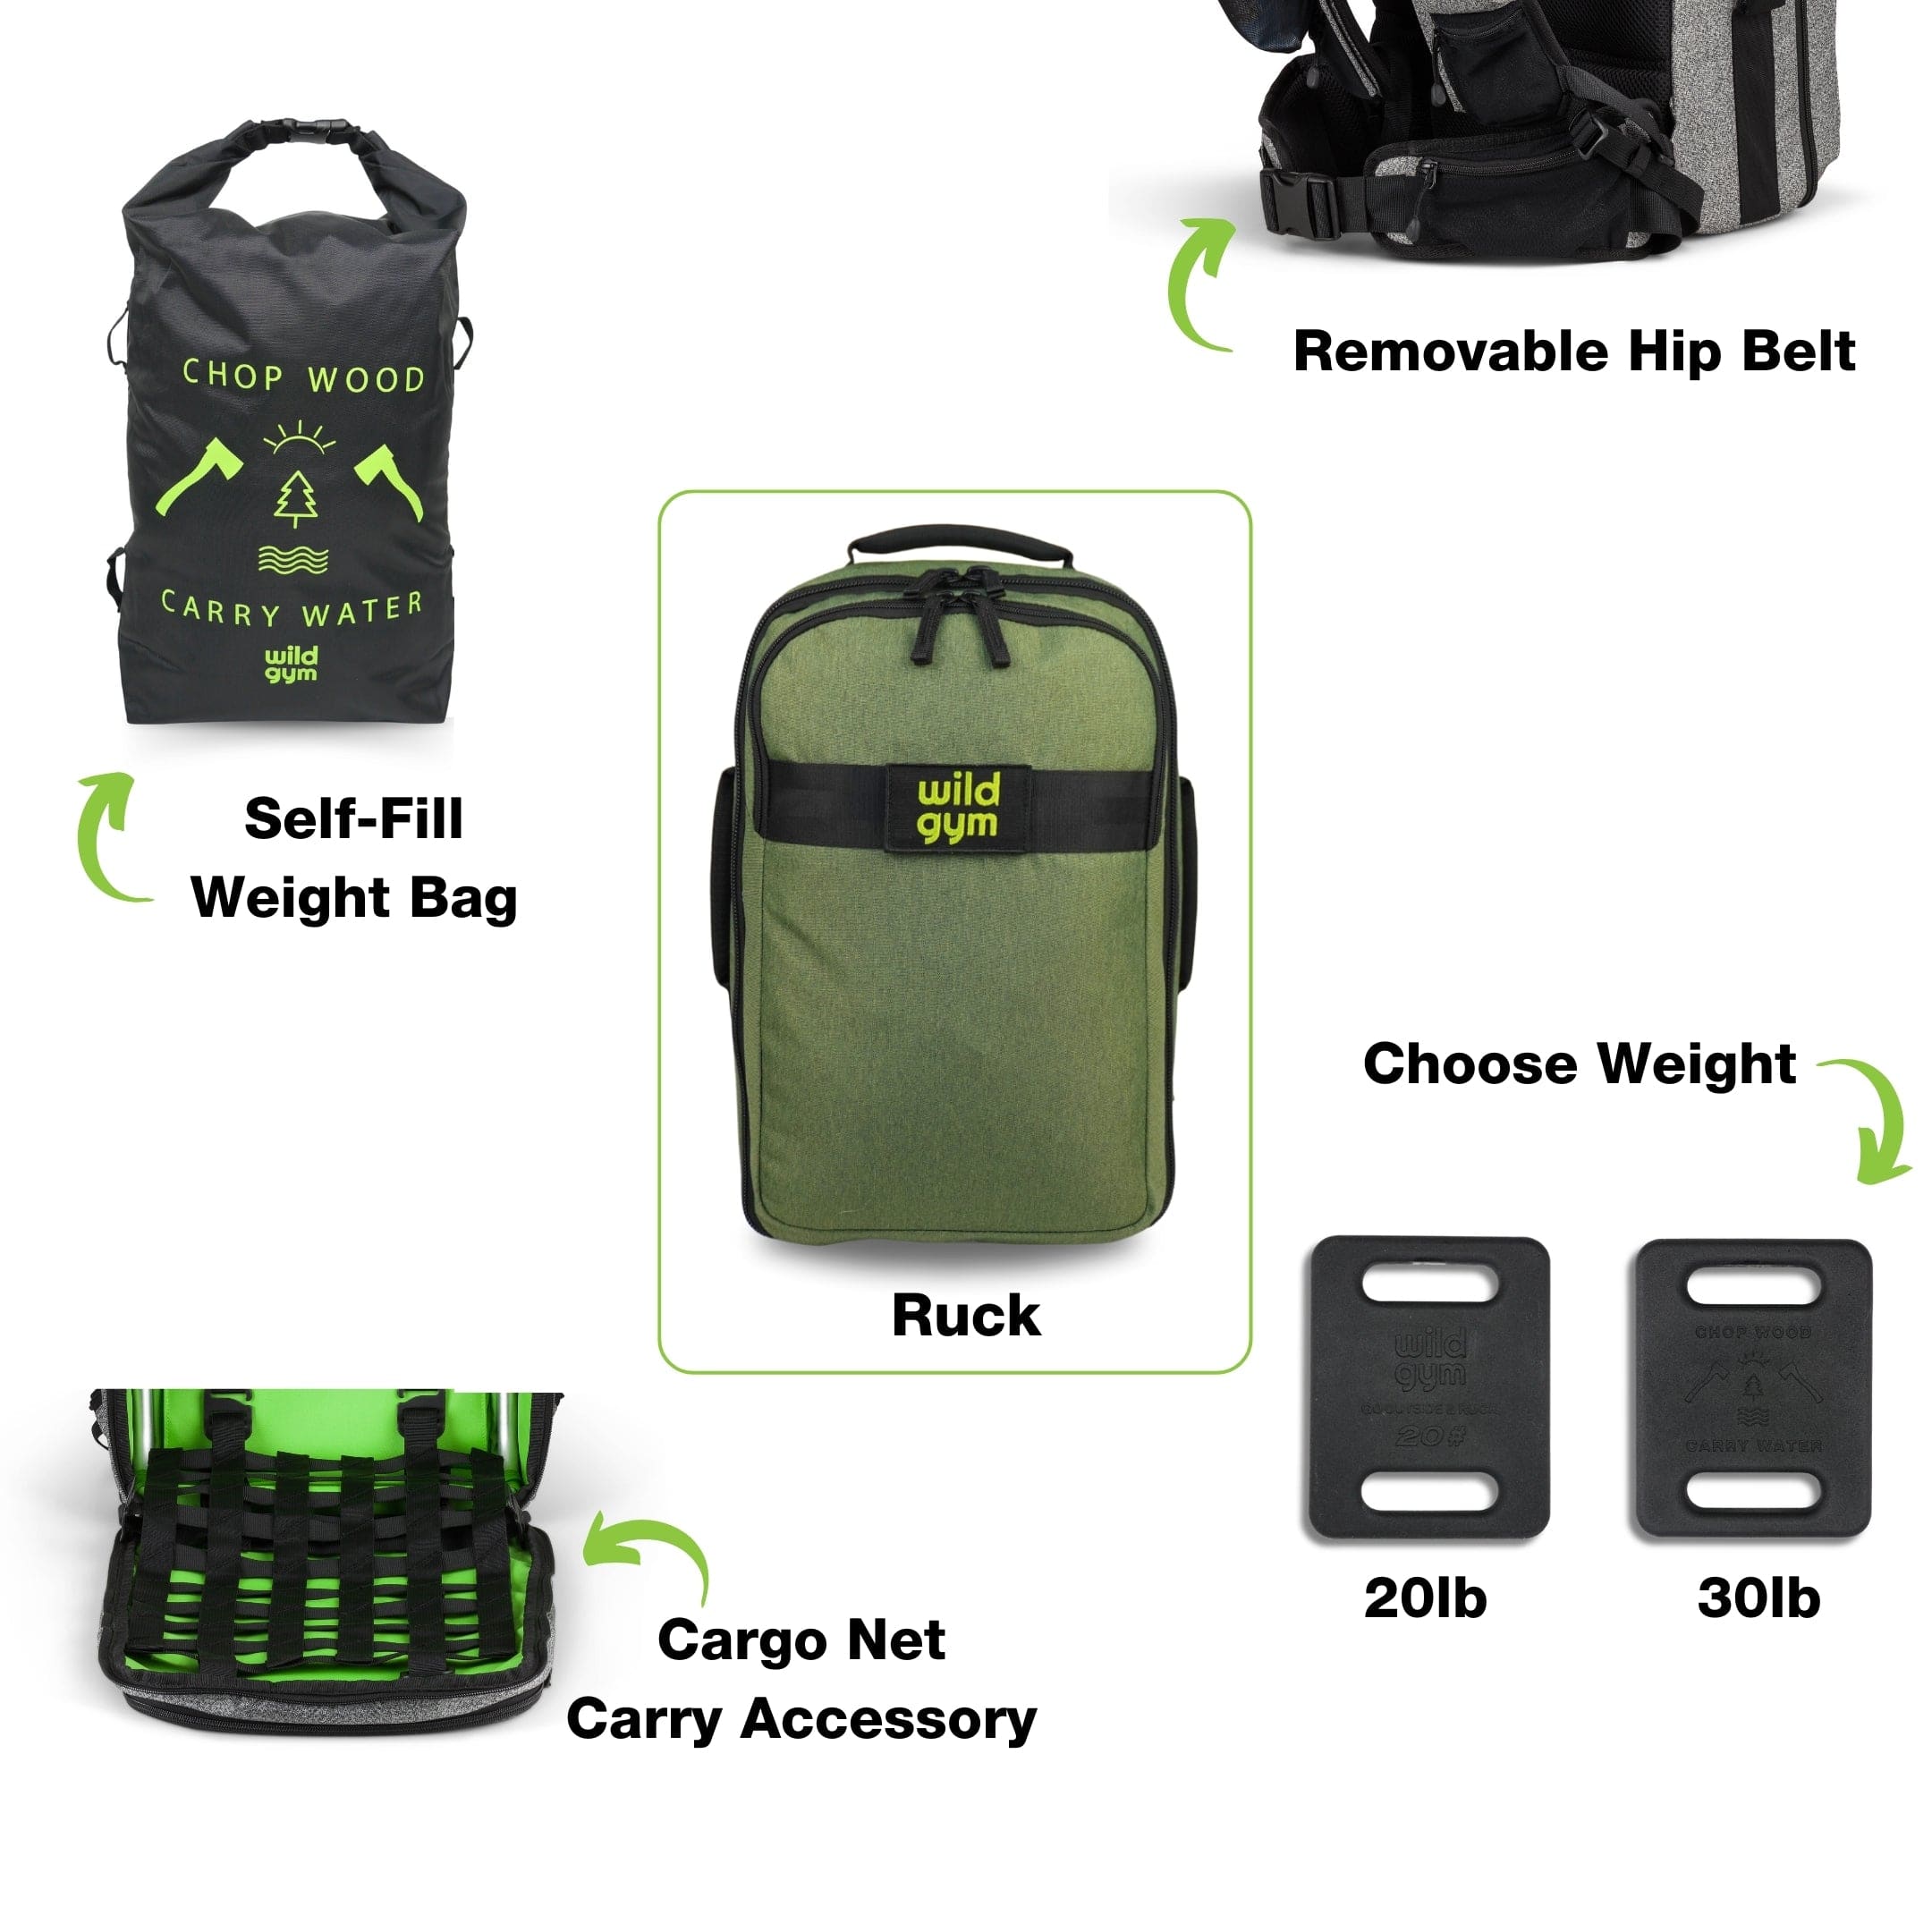 Complete Ruck System